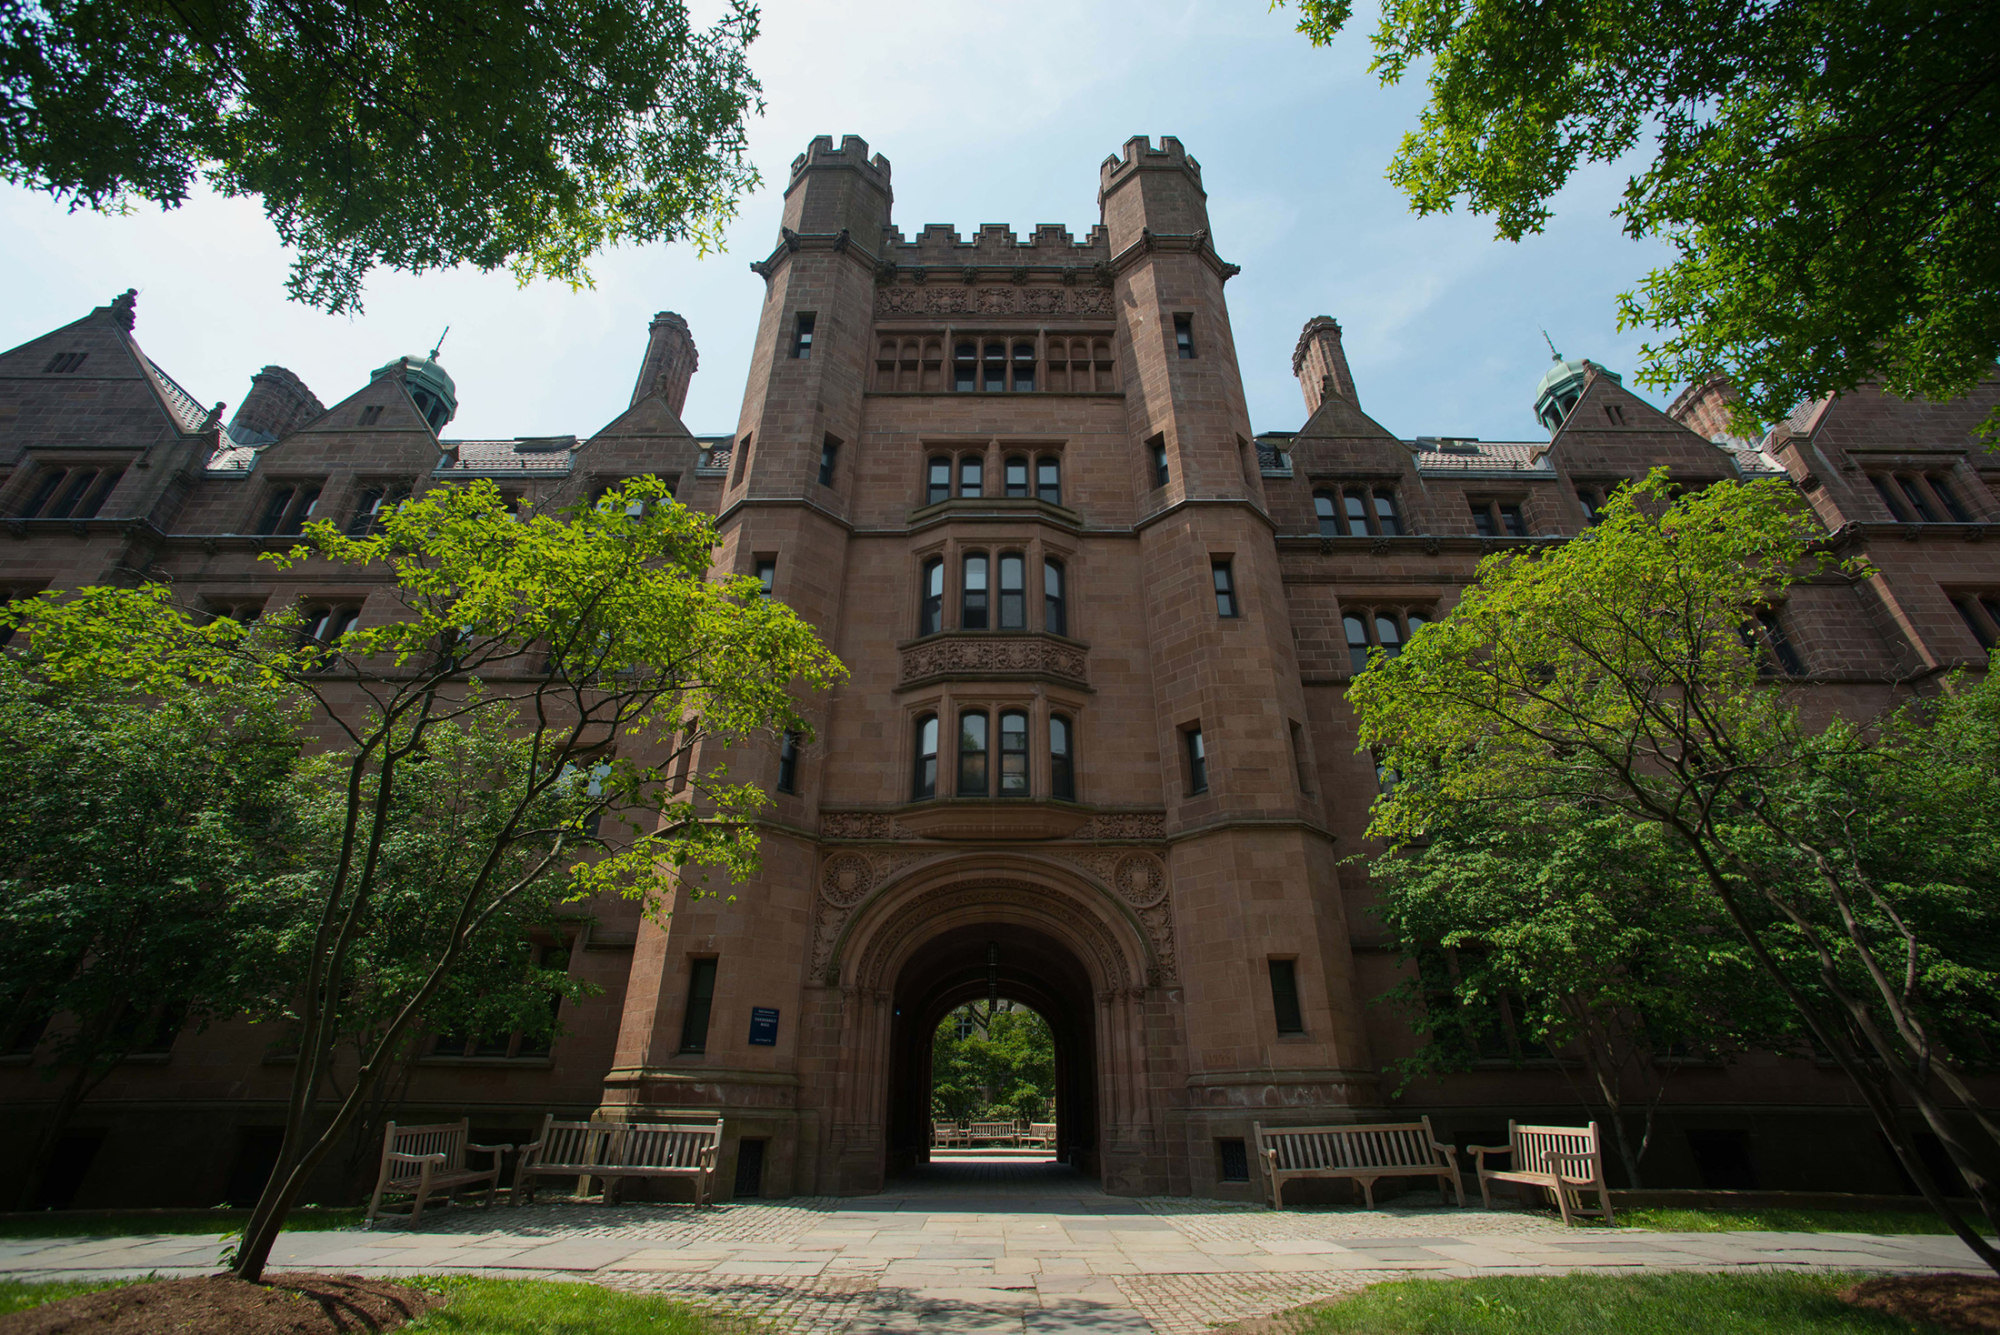 The campus of Yale University in New Haven, CT, U.S., on Friday, June 12, 2015.
